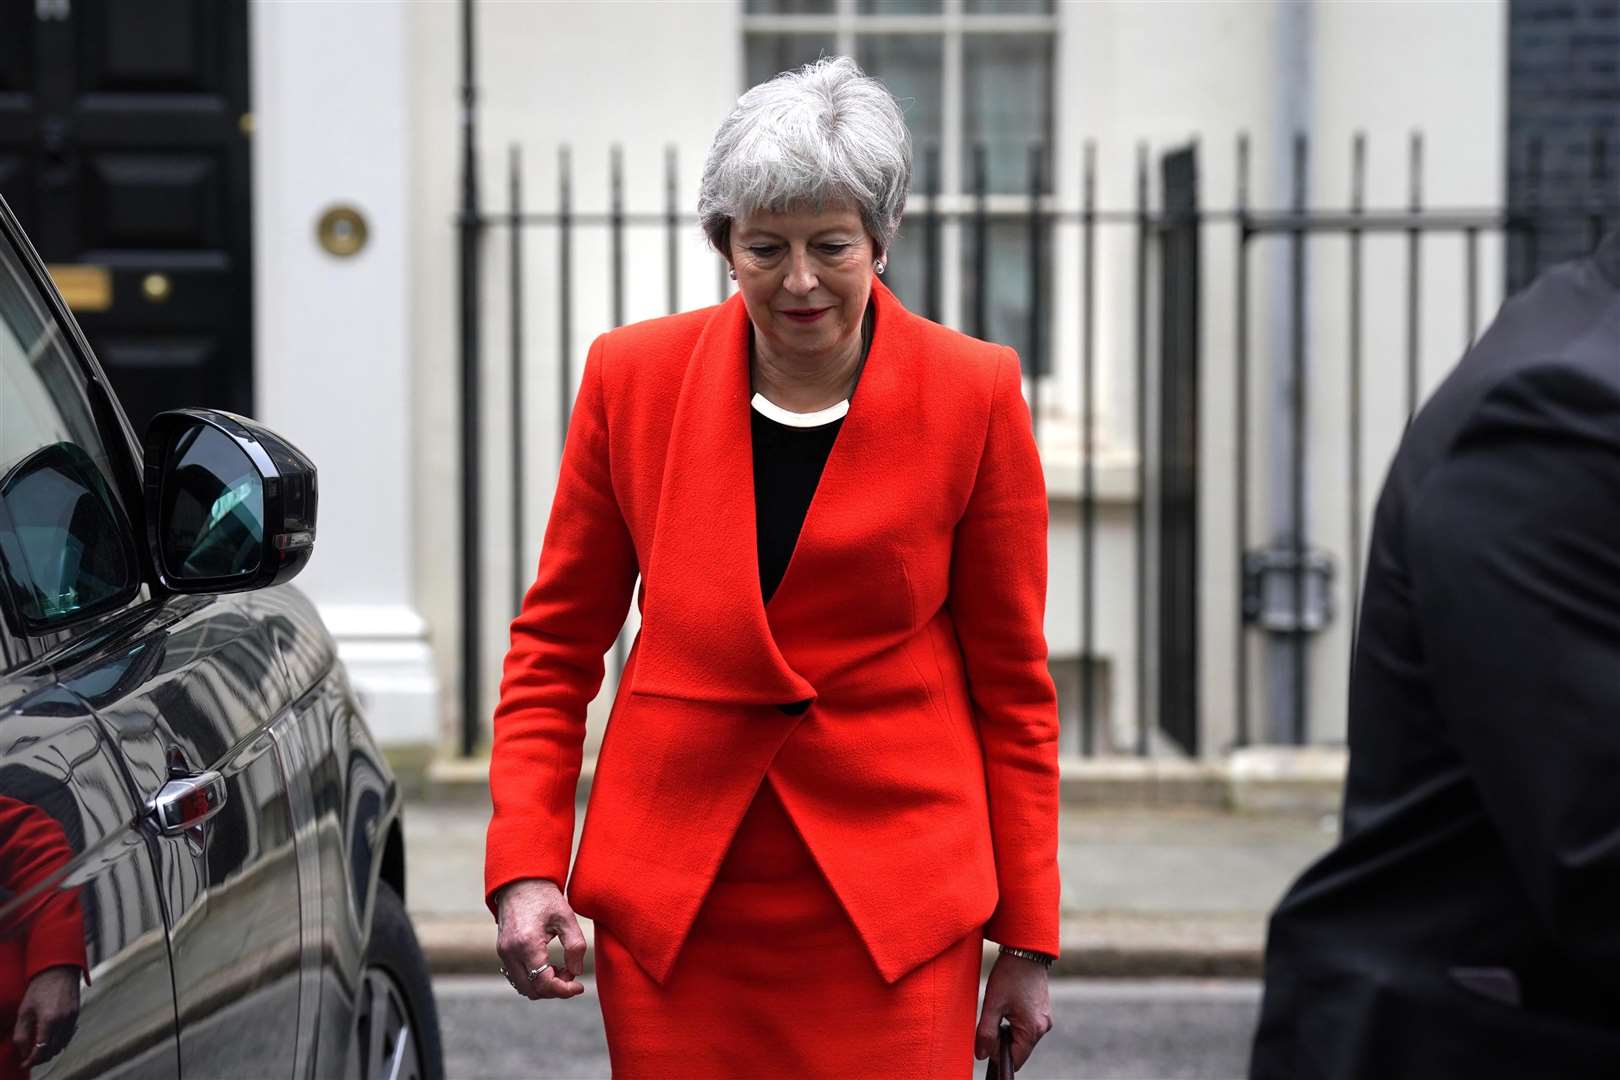 Theresa May’s decision to call a snap election and the Brexit chaos that followed saw her forced out of No 10 three years later (Kirsty O’Connor/PA)